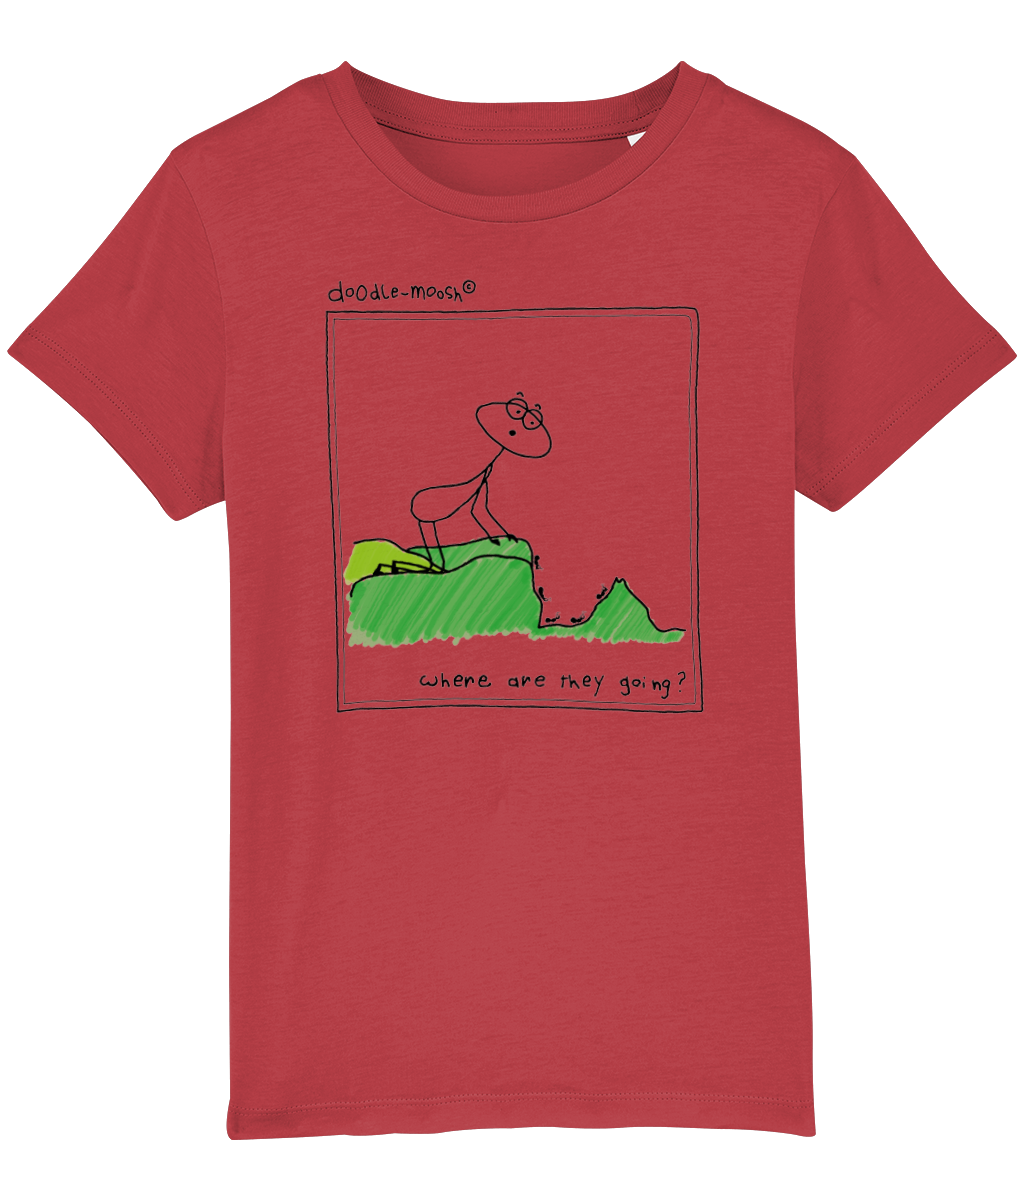 Where are they going t-shirt, red with black, colourful drawing